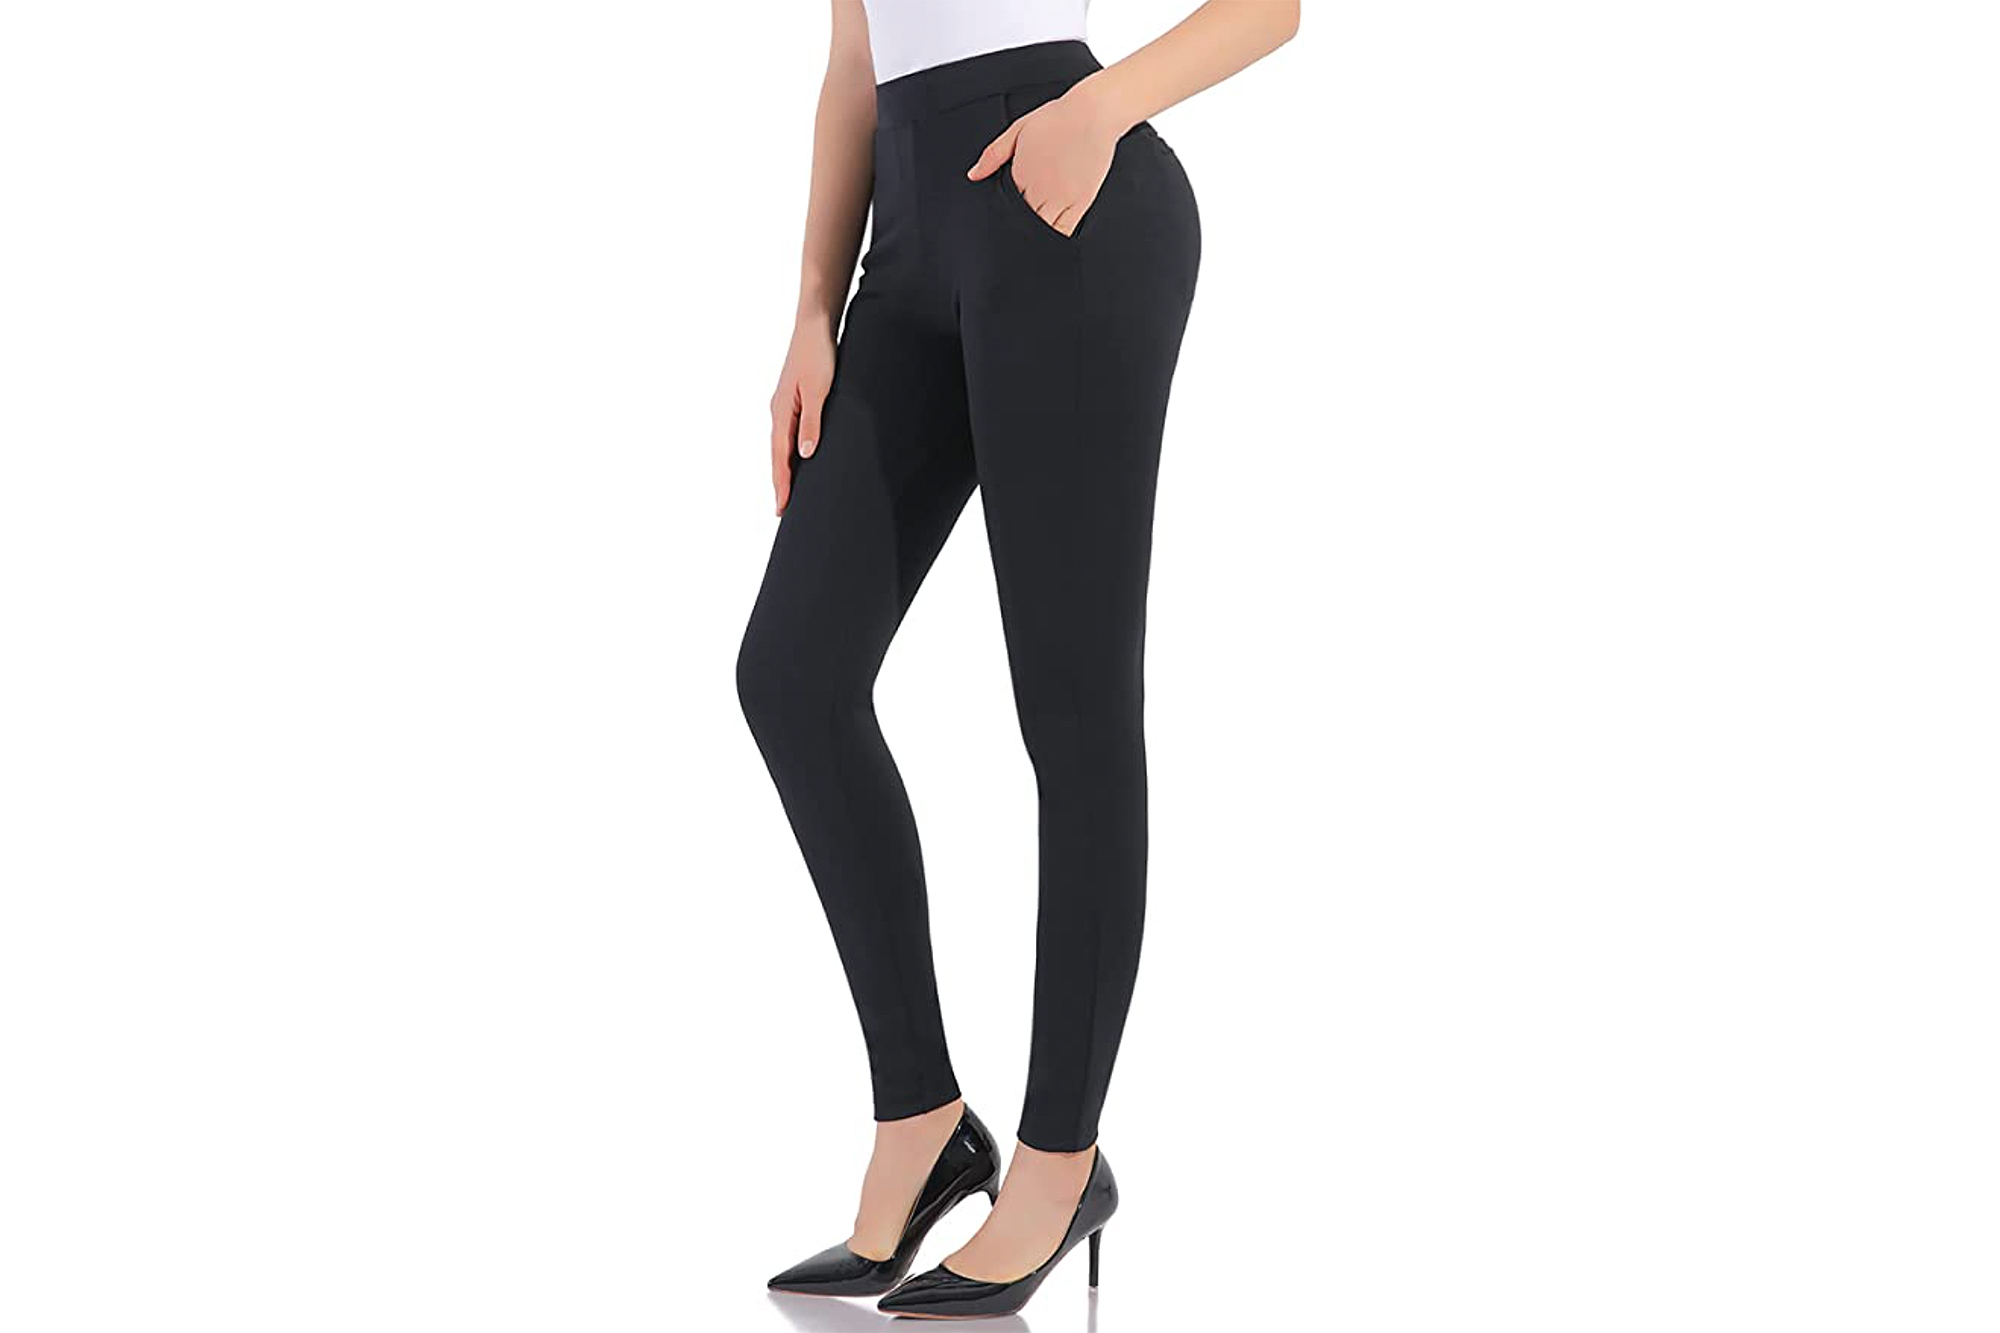 You Can Even Wear These Yoga Pants to the Office